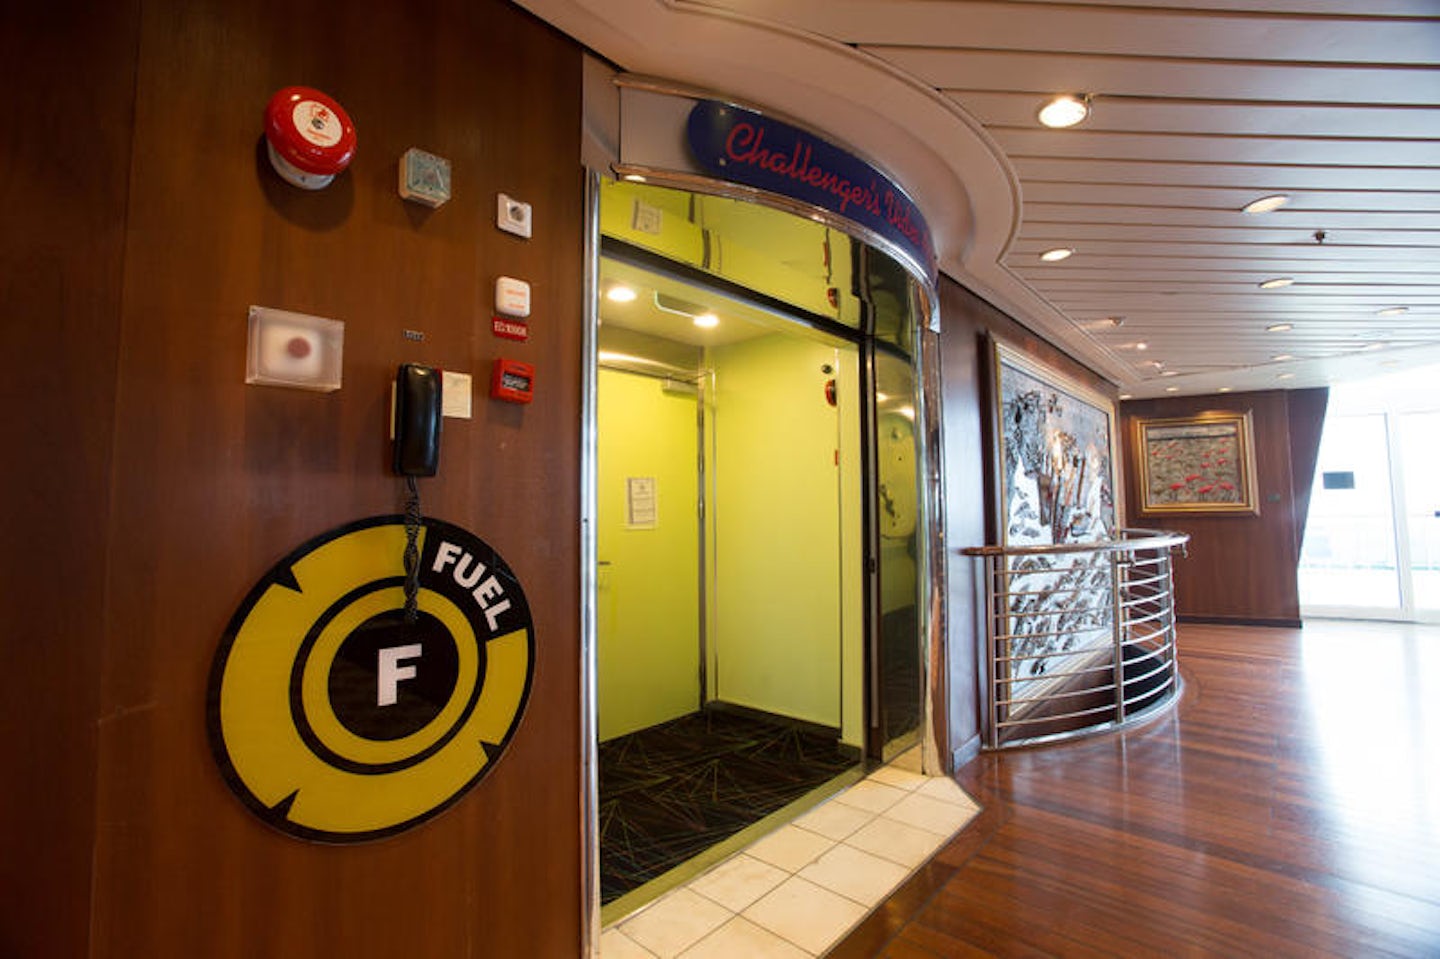 Fuel Teen Center on Enchantment of the Seas